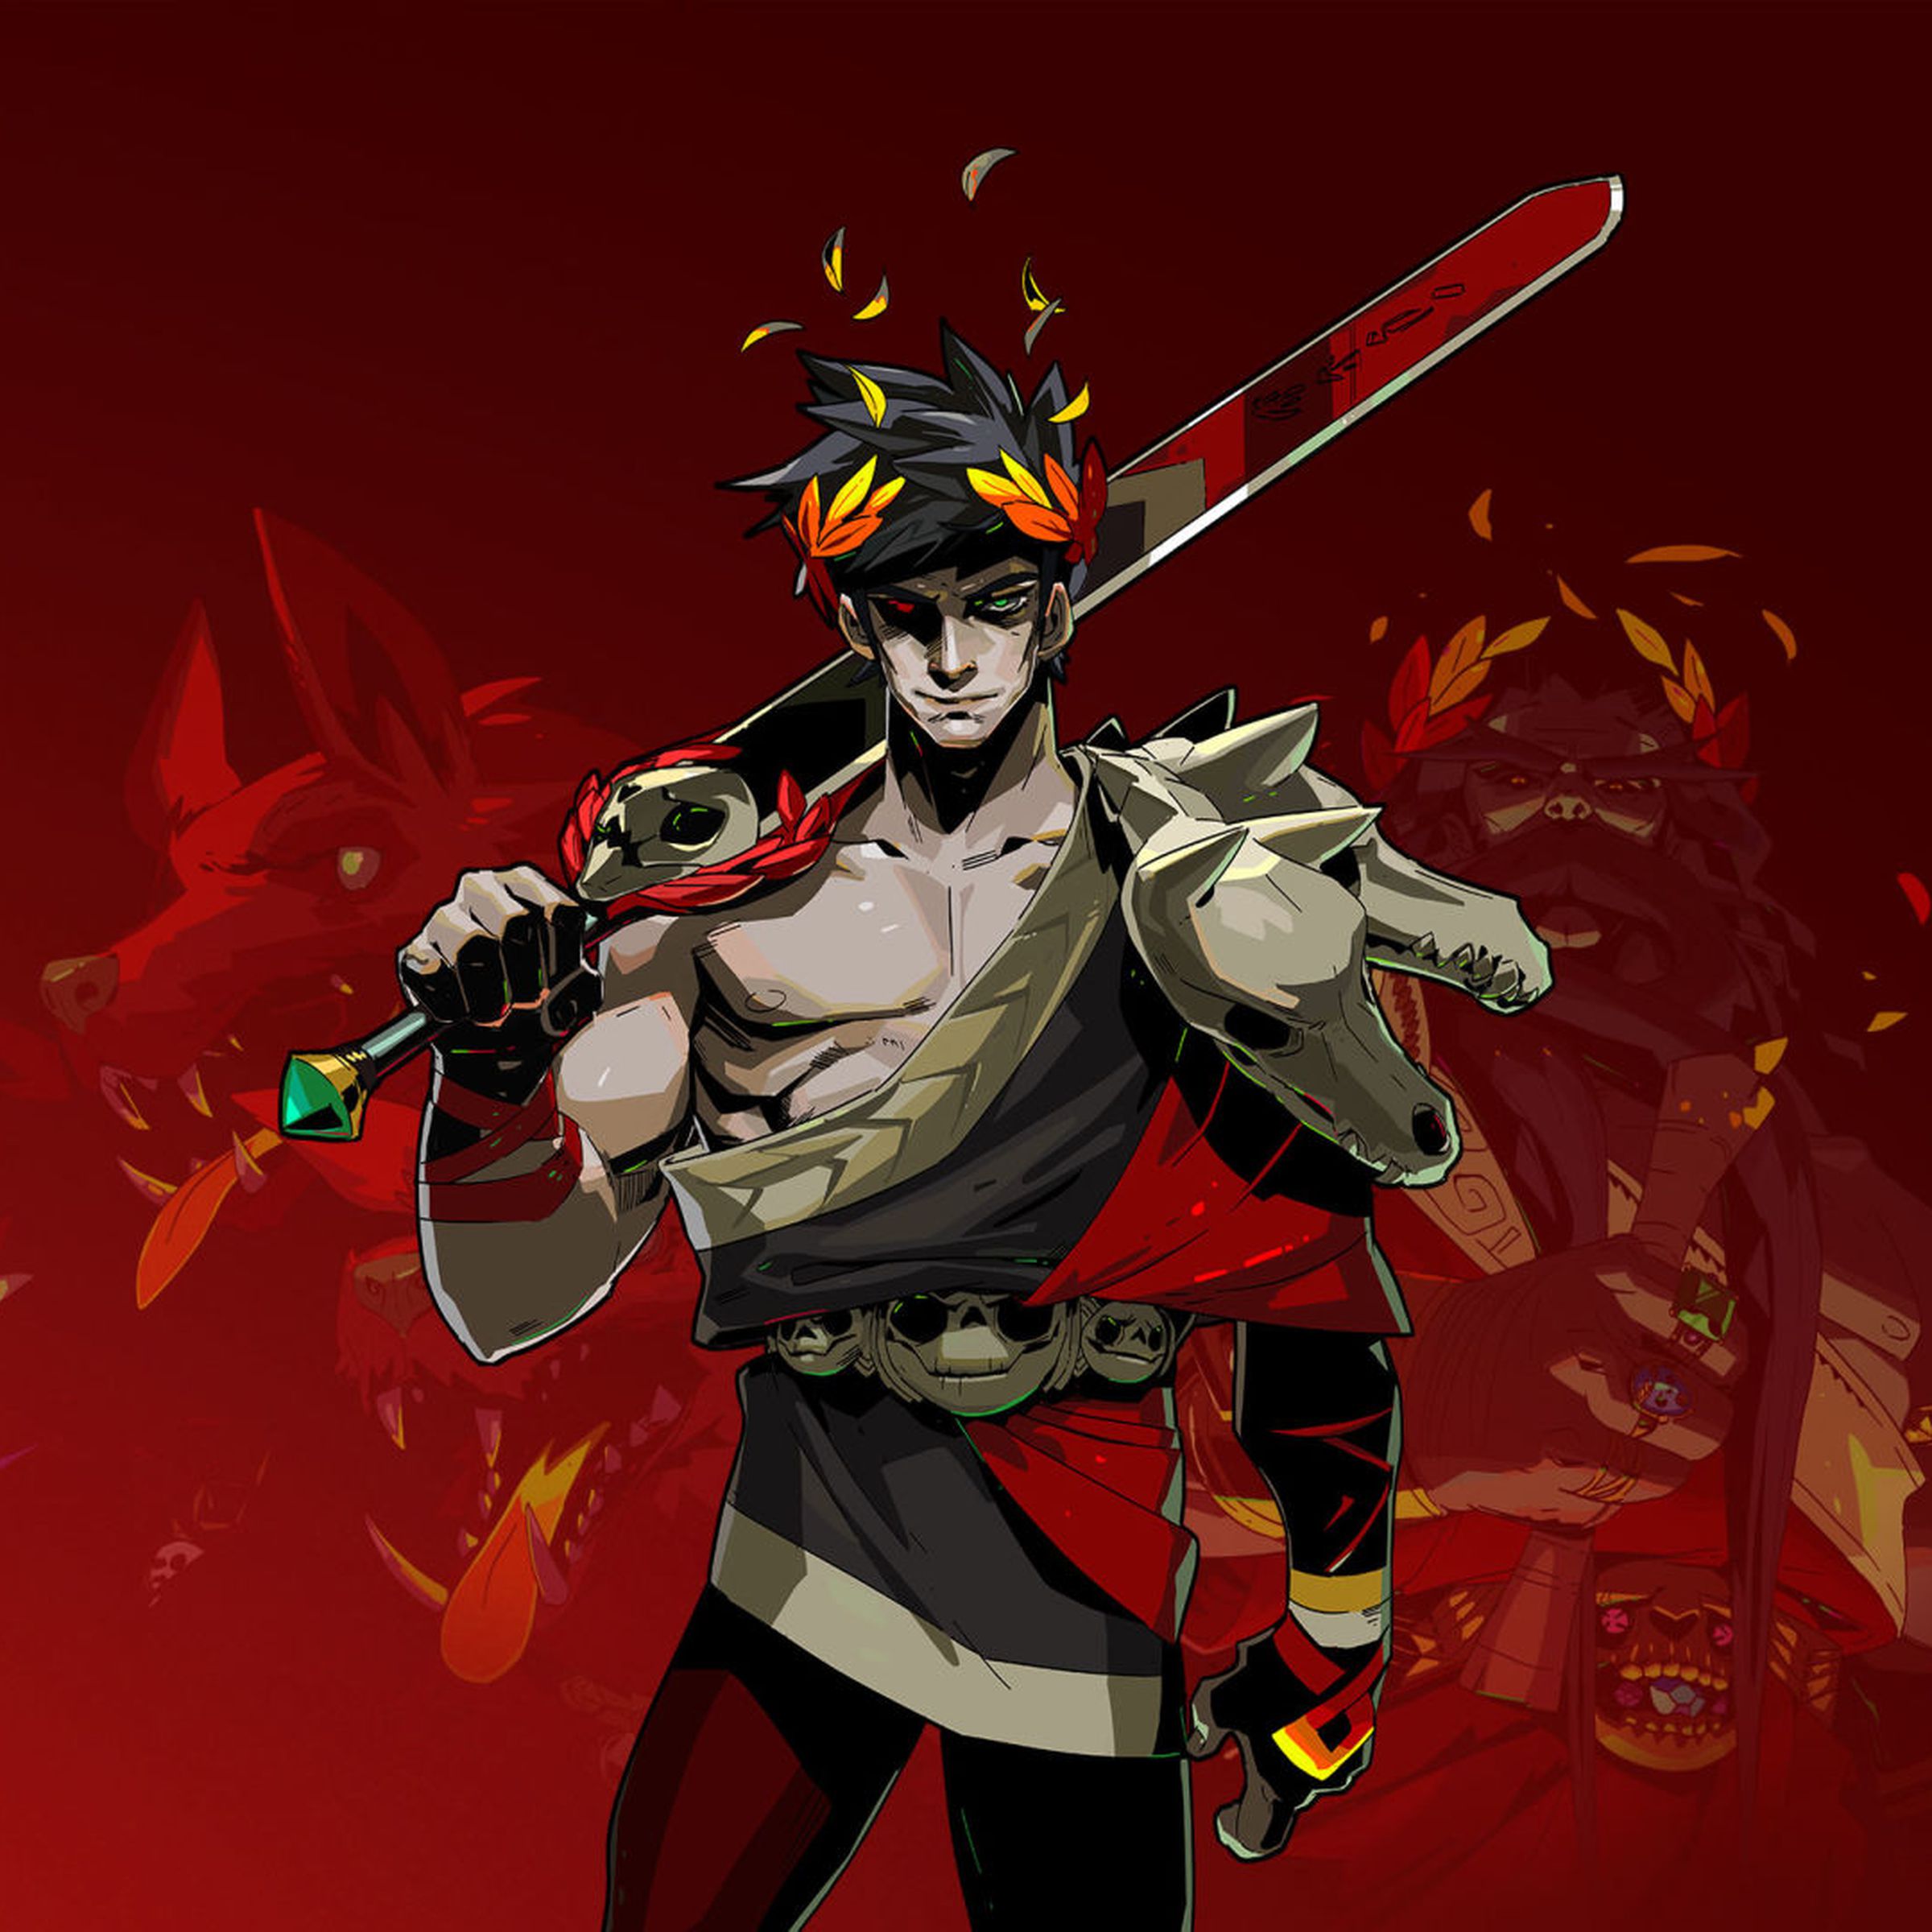 Artwork for Hades with a muscular man in ancient Greek clothing with a crown of red, yellow, and orange laurels and a massive red sword hanging over his right shoulder.